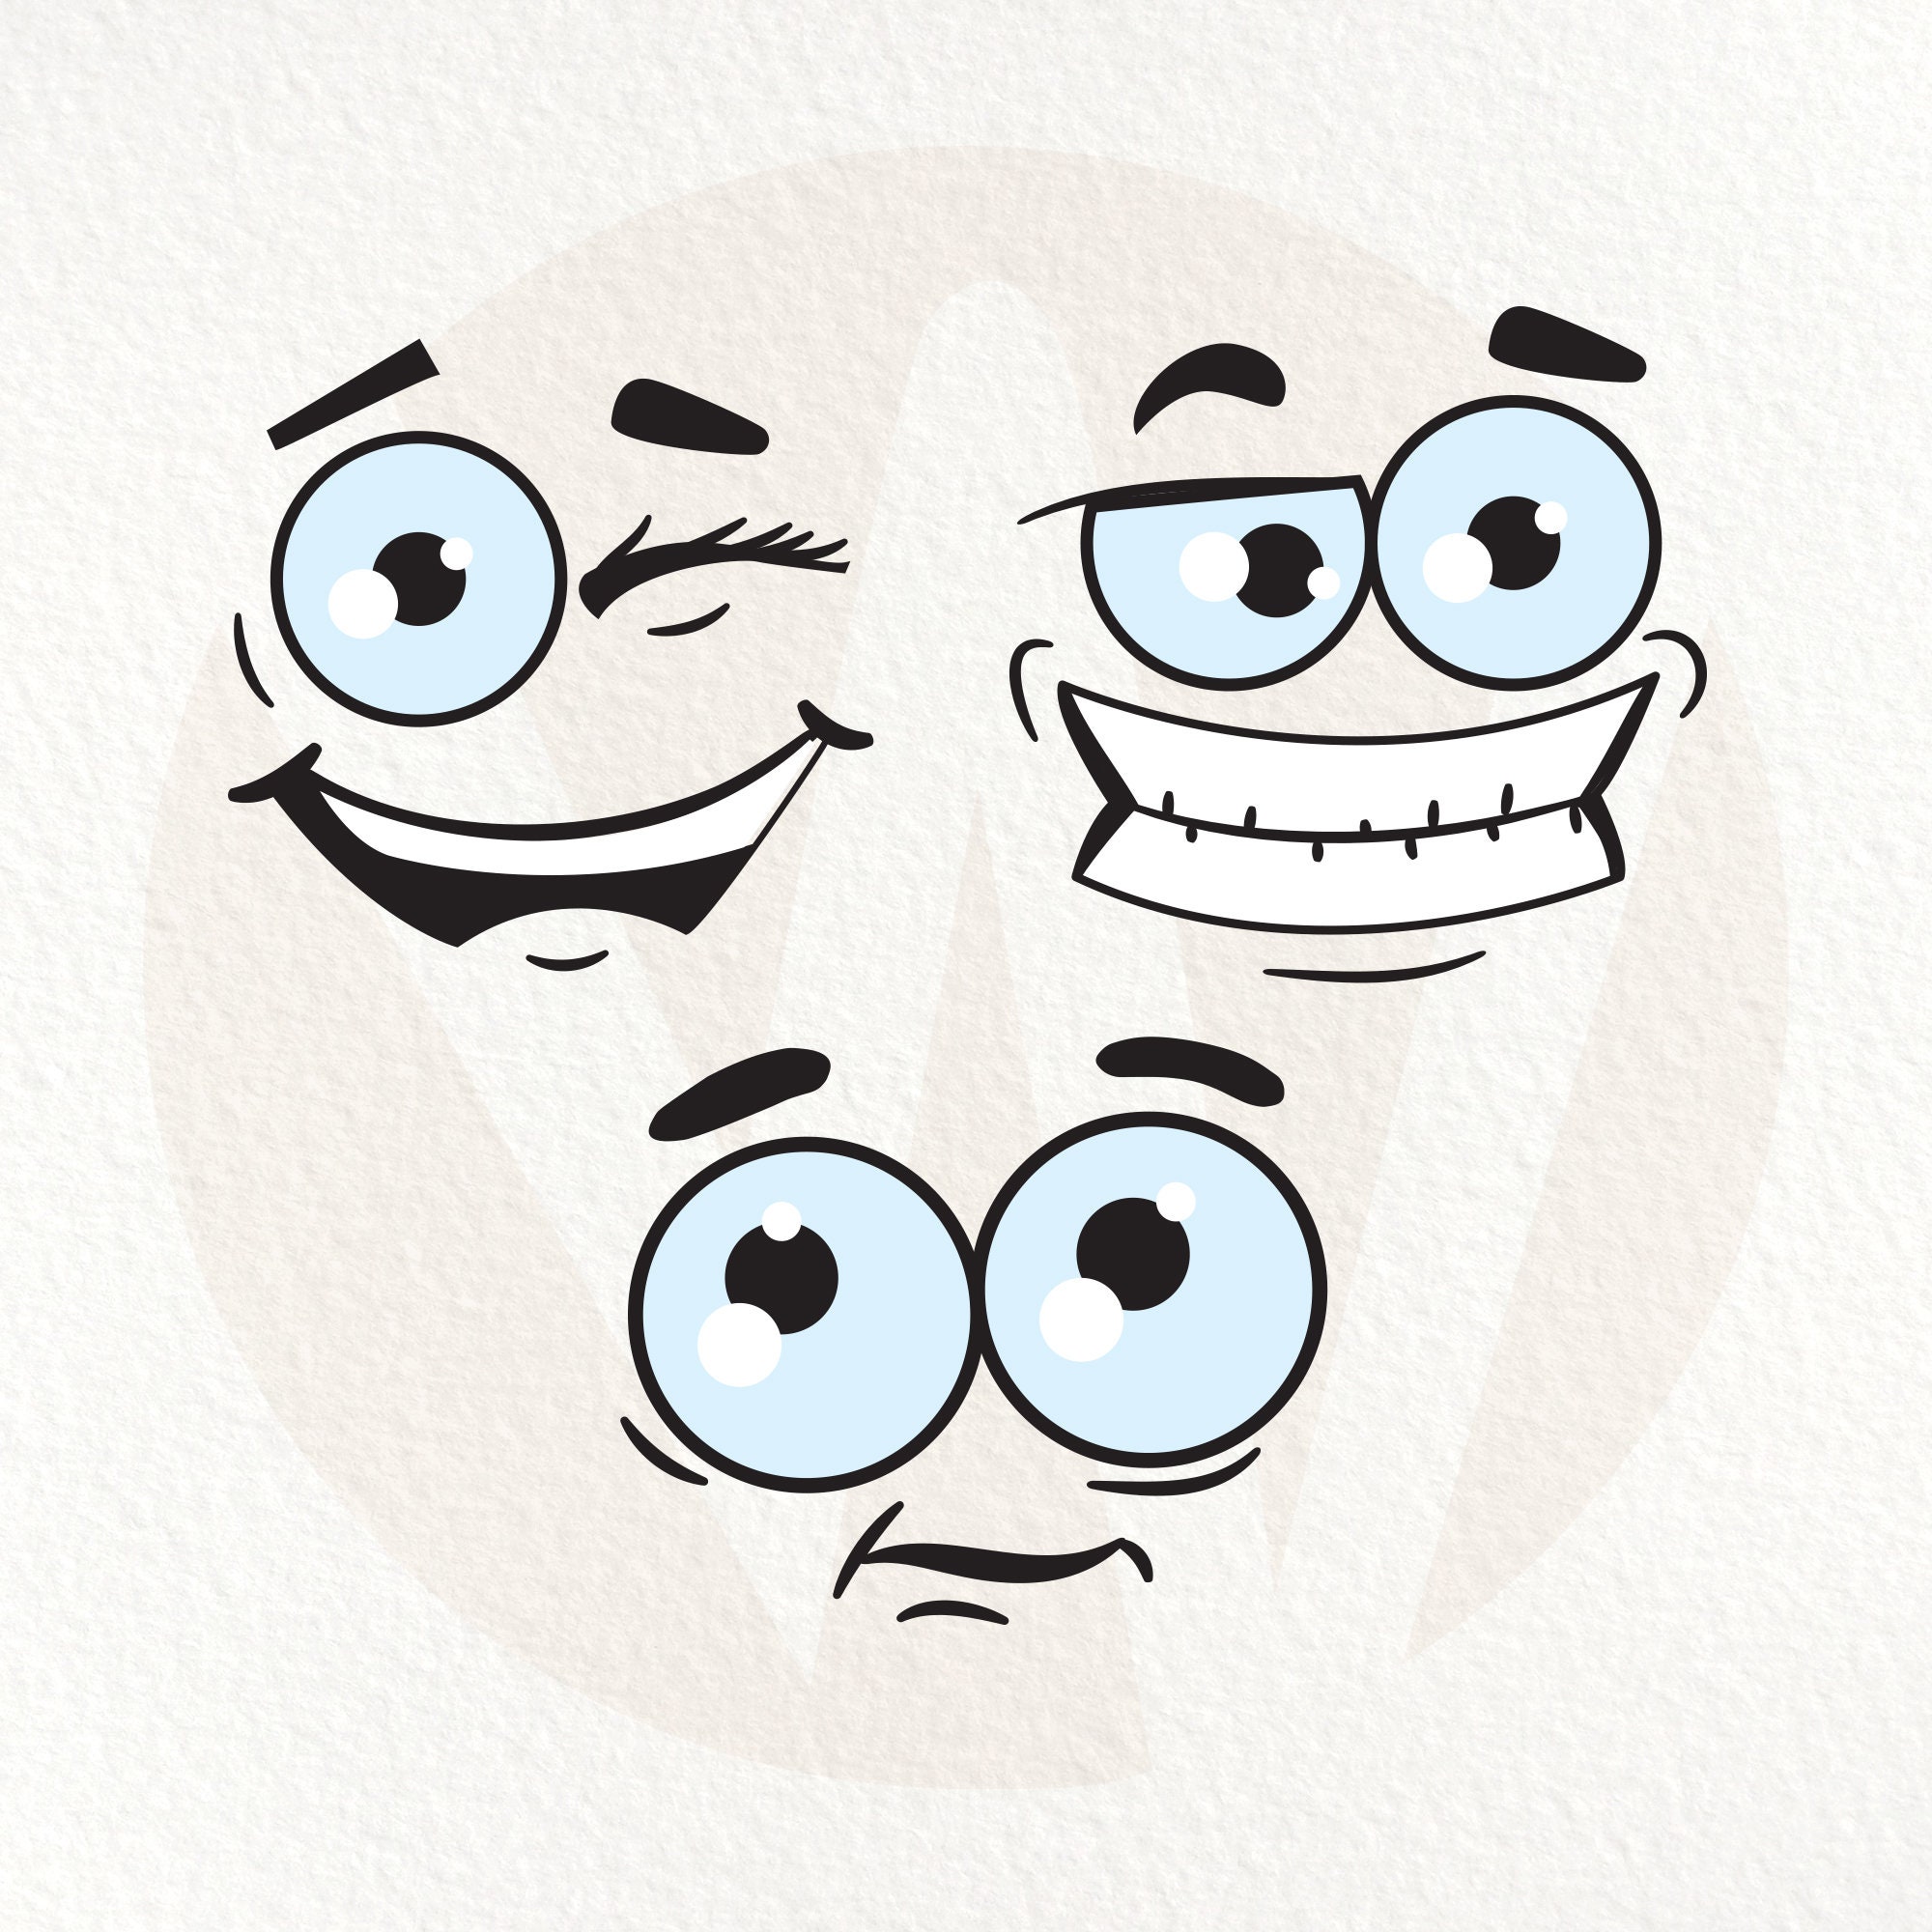 Funny scared face expression cartoon illustration Poster for Sale